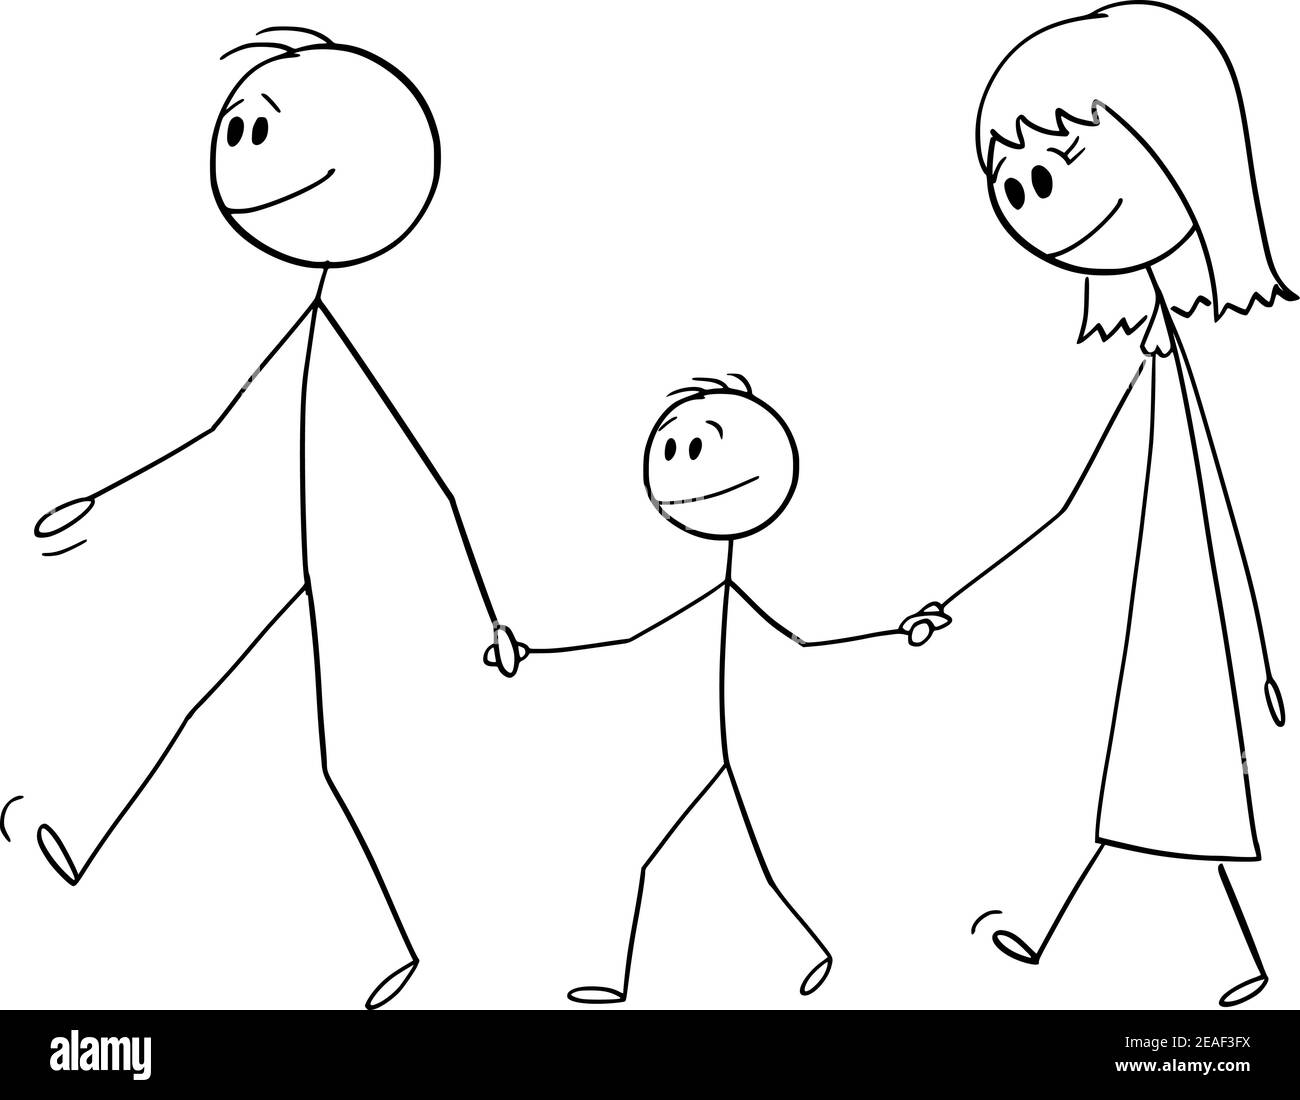 Parents with son or family on walk together, vector cartoon stick figure or character illustration. Stock Vector